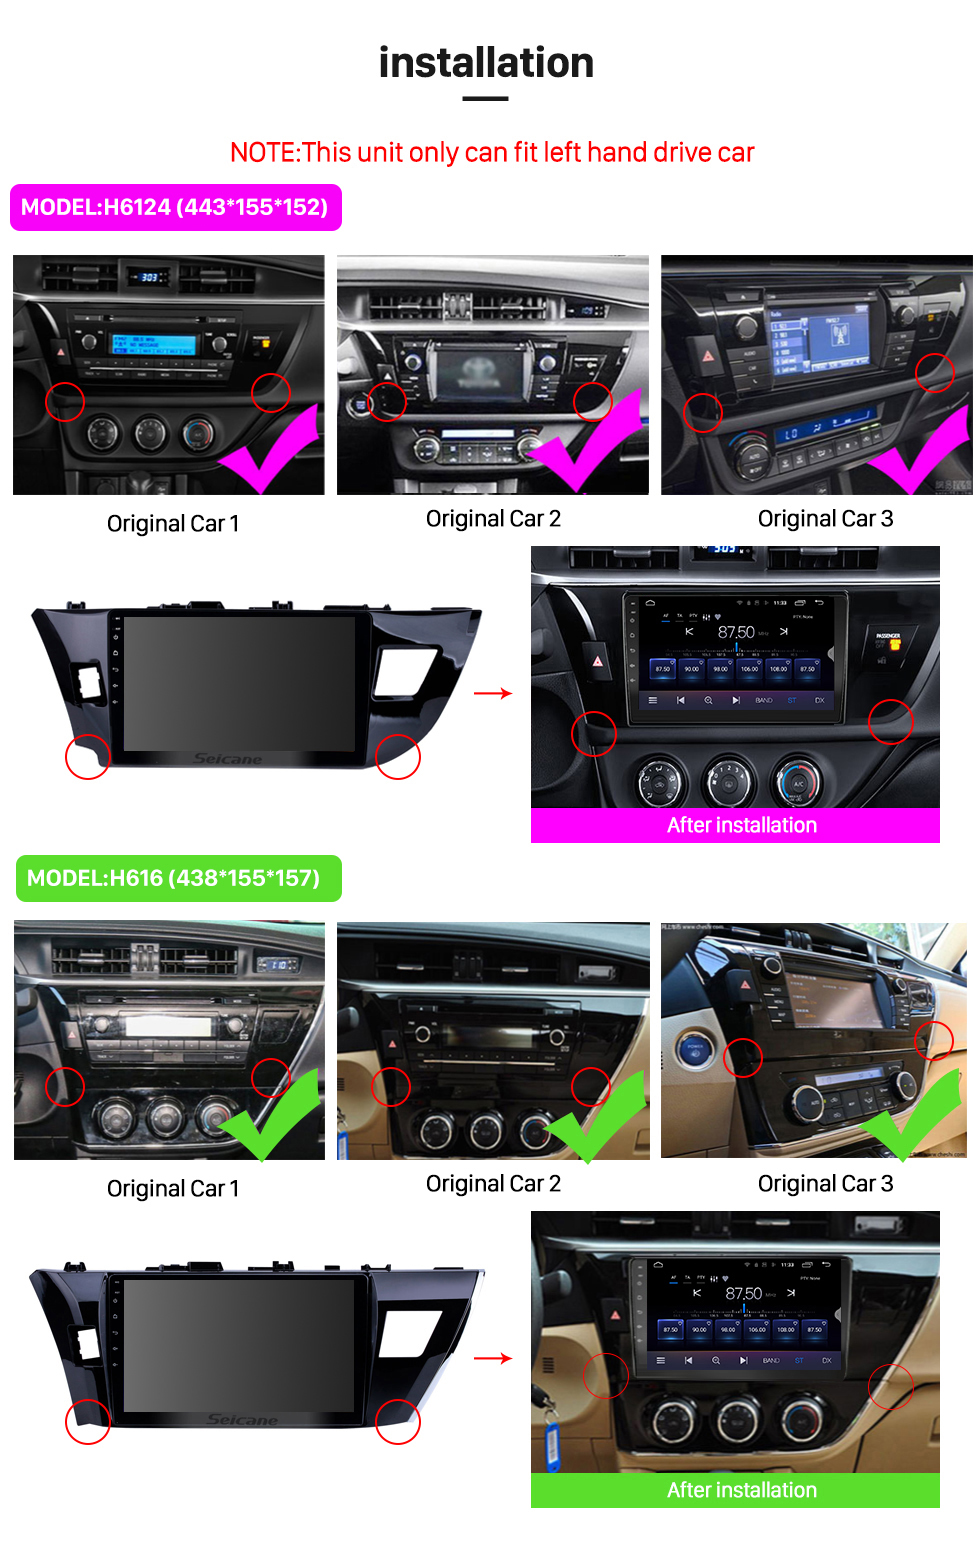 Seicane 10.1 Inch Android 10.0 Touch Screen radio Bluetooth GPS Navigation system For 2013 2014 2015 Toyota LEVIN Support TPMS DVR OBD II USB SD  WiFi Rear camera Steering Wheel Control HD 1080P Video AUX